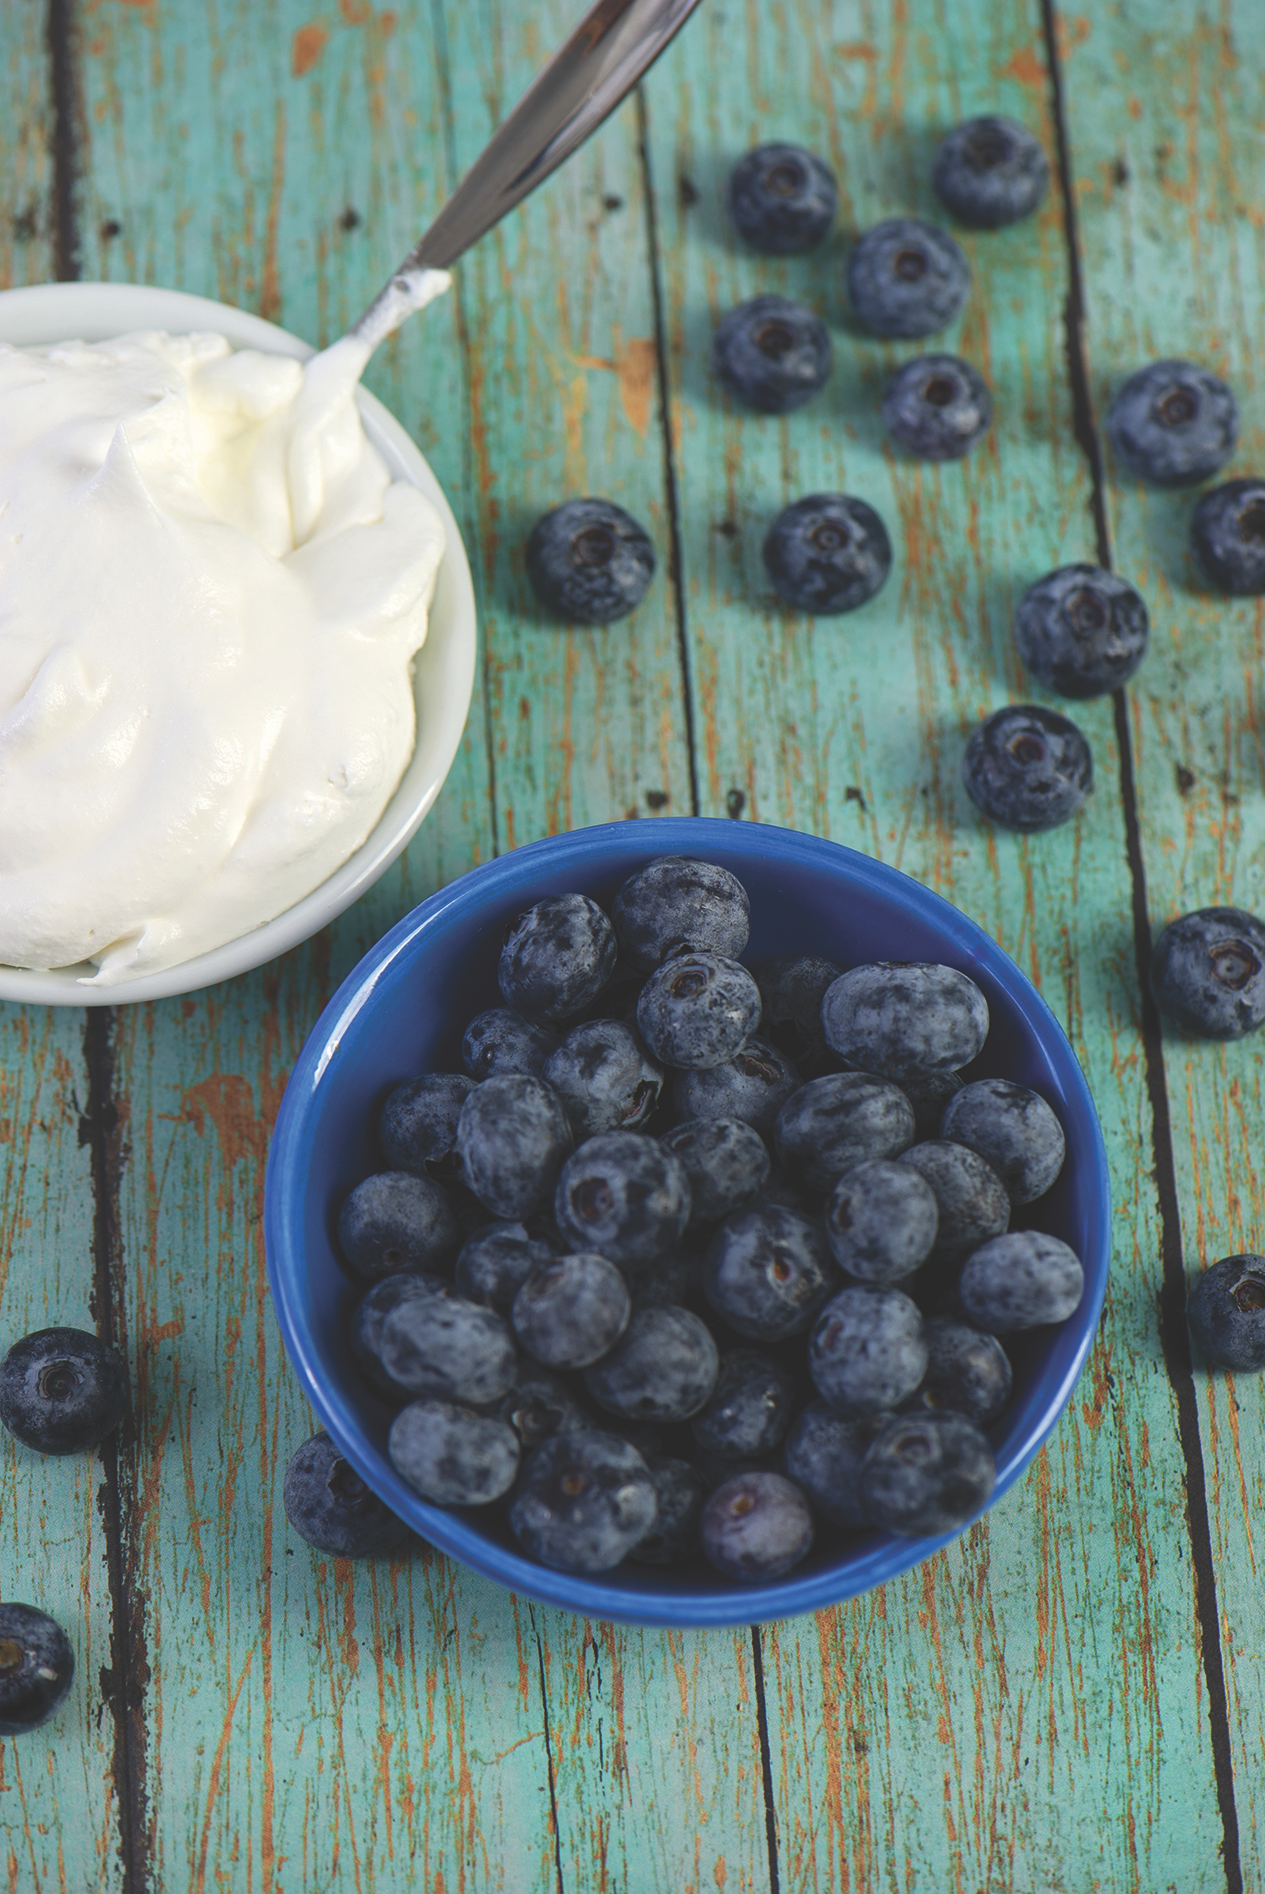 Ways to Incorporate More Blueberries Into Your Diet